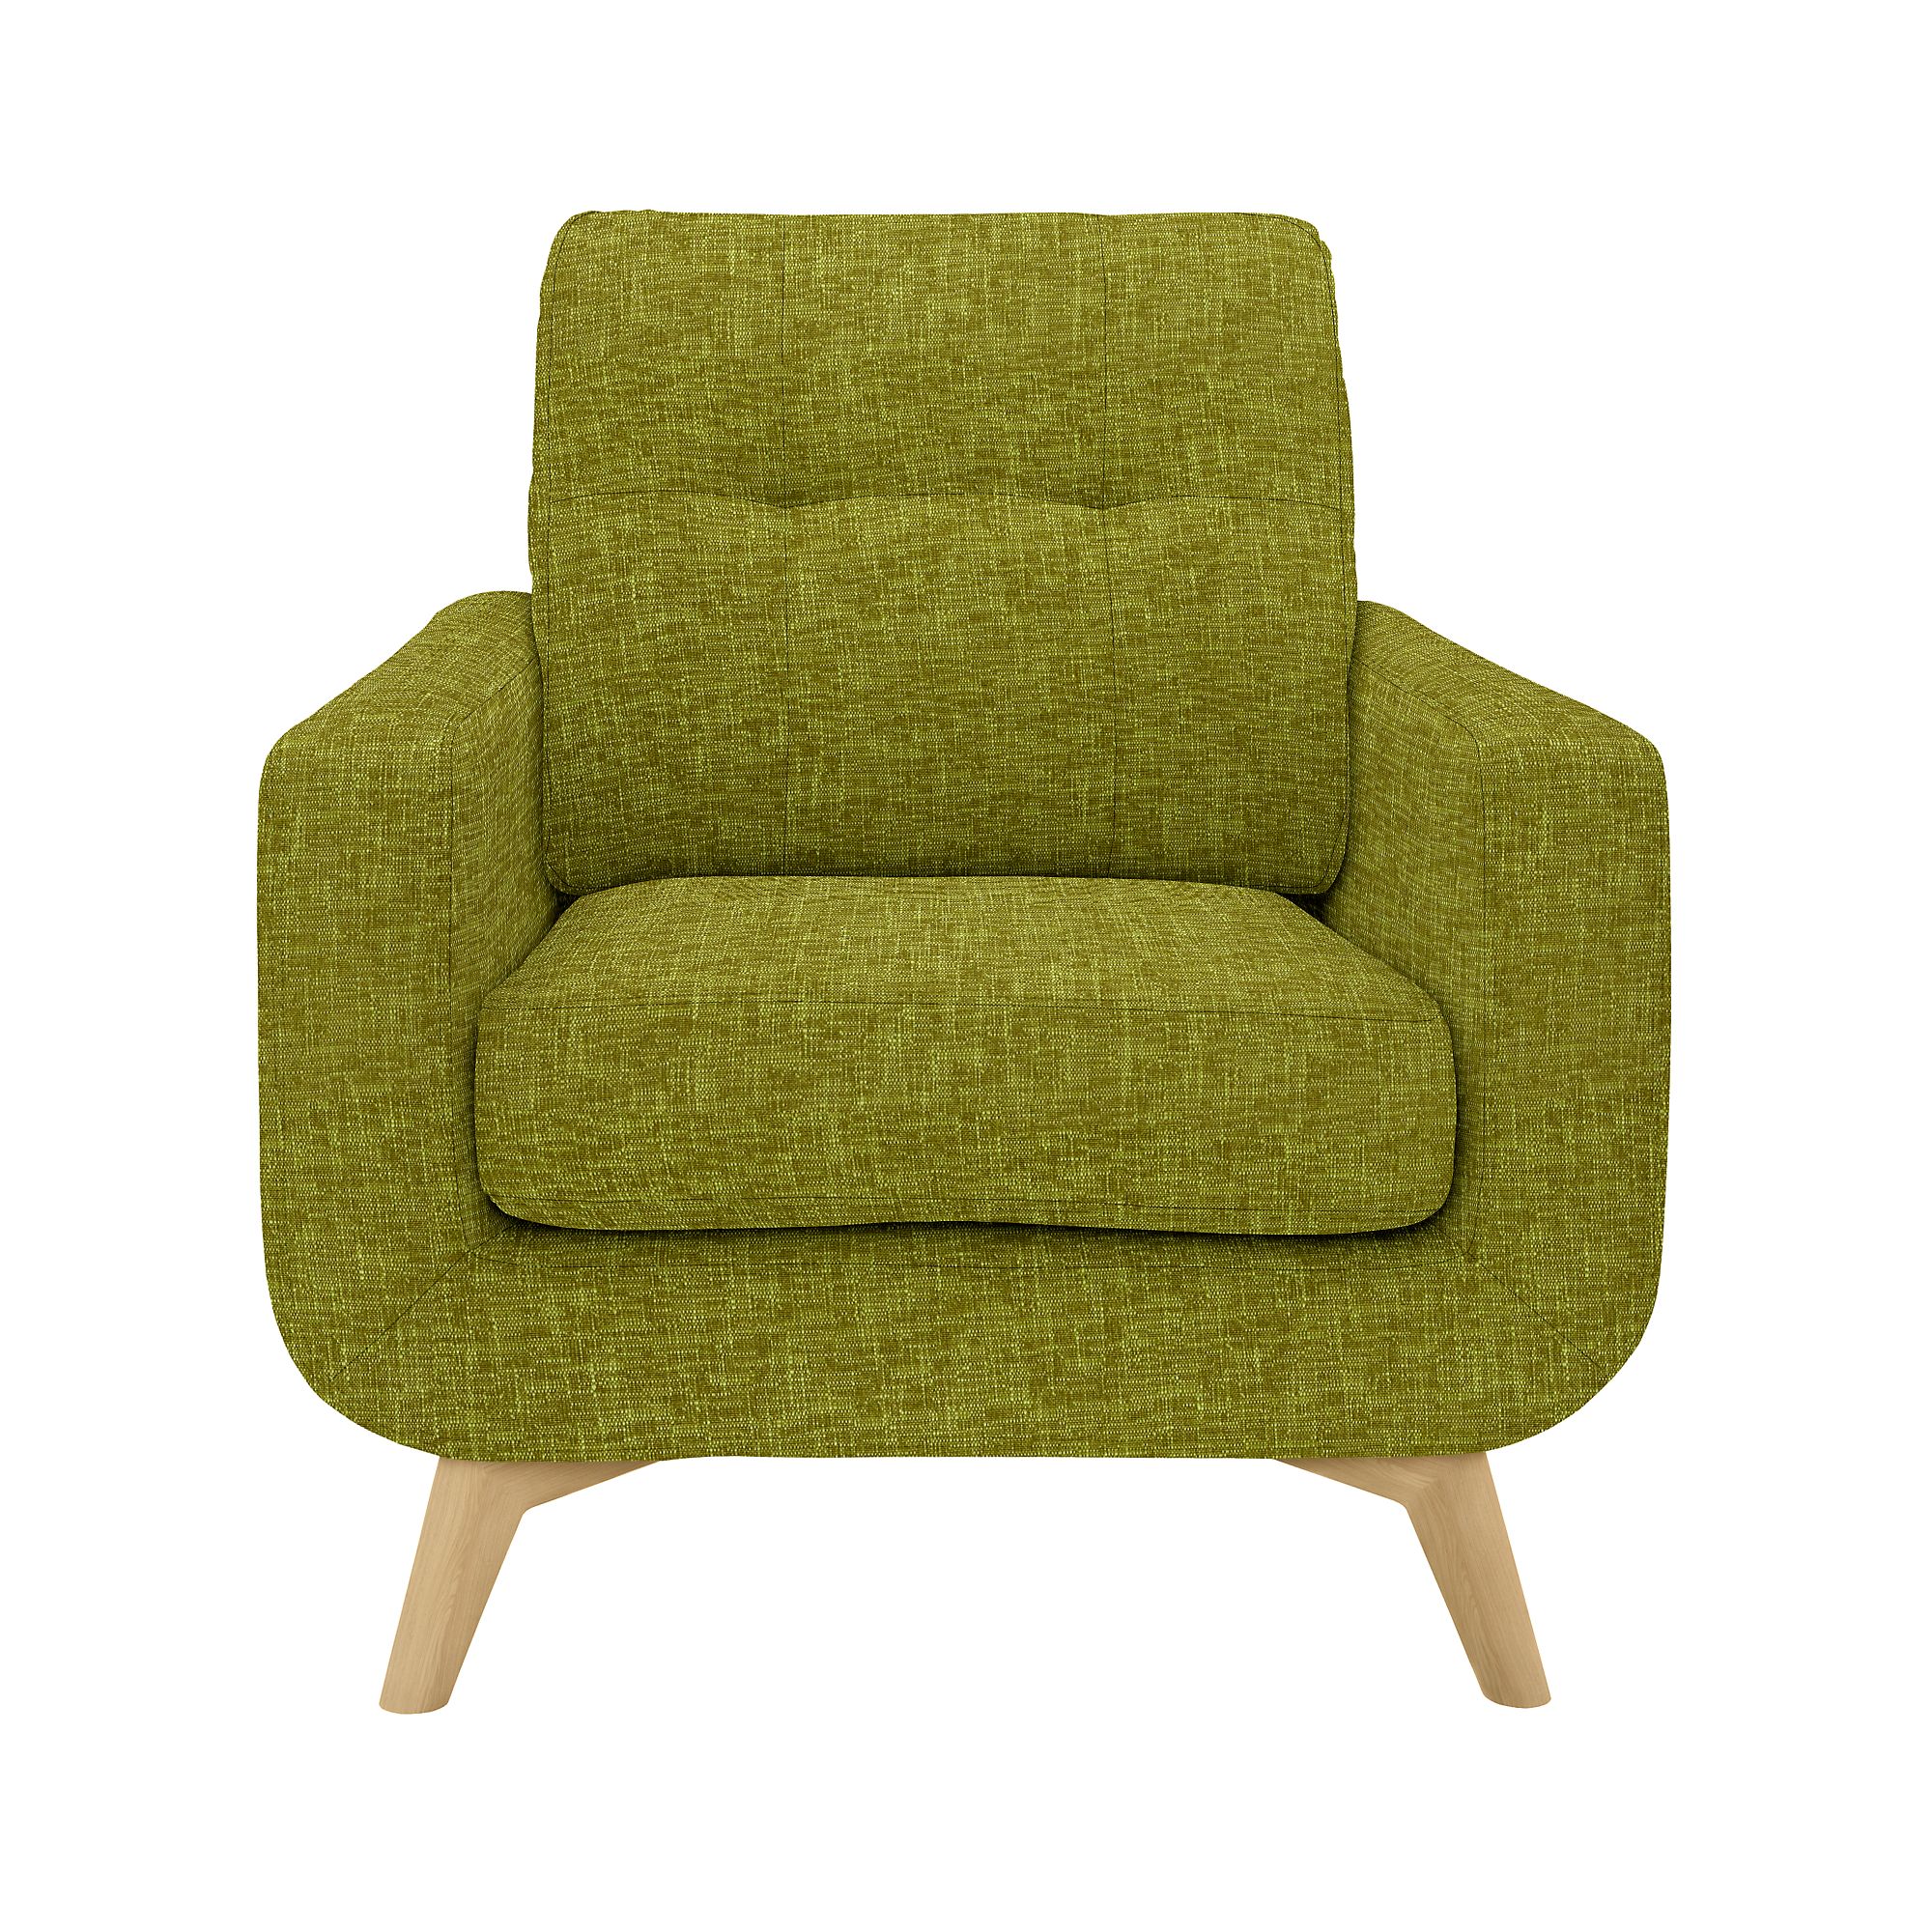 Barbican Armchair with Light Legs,